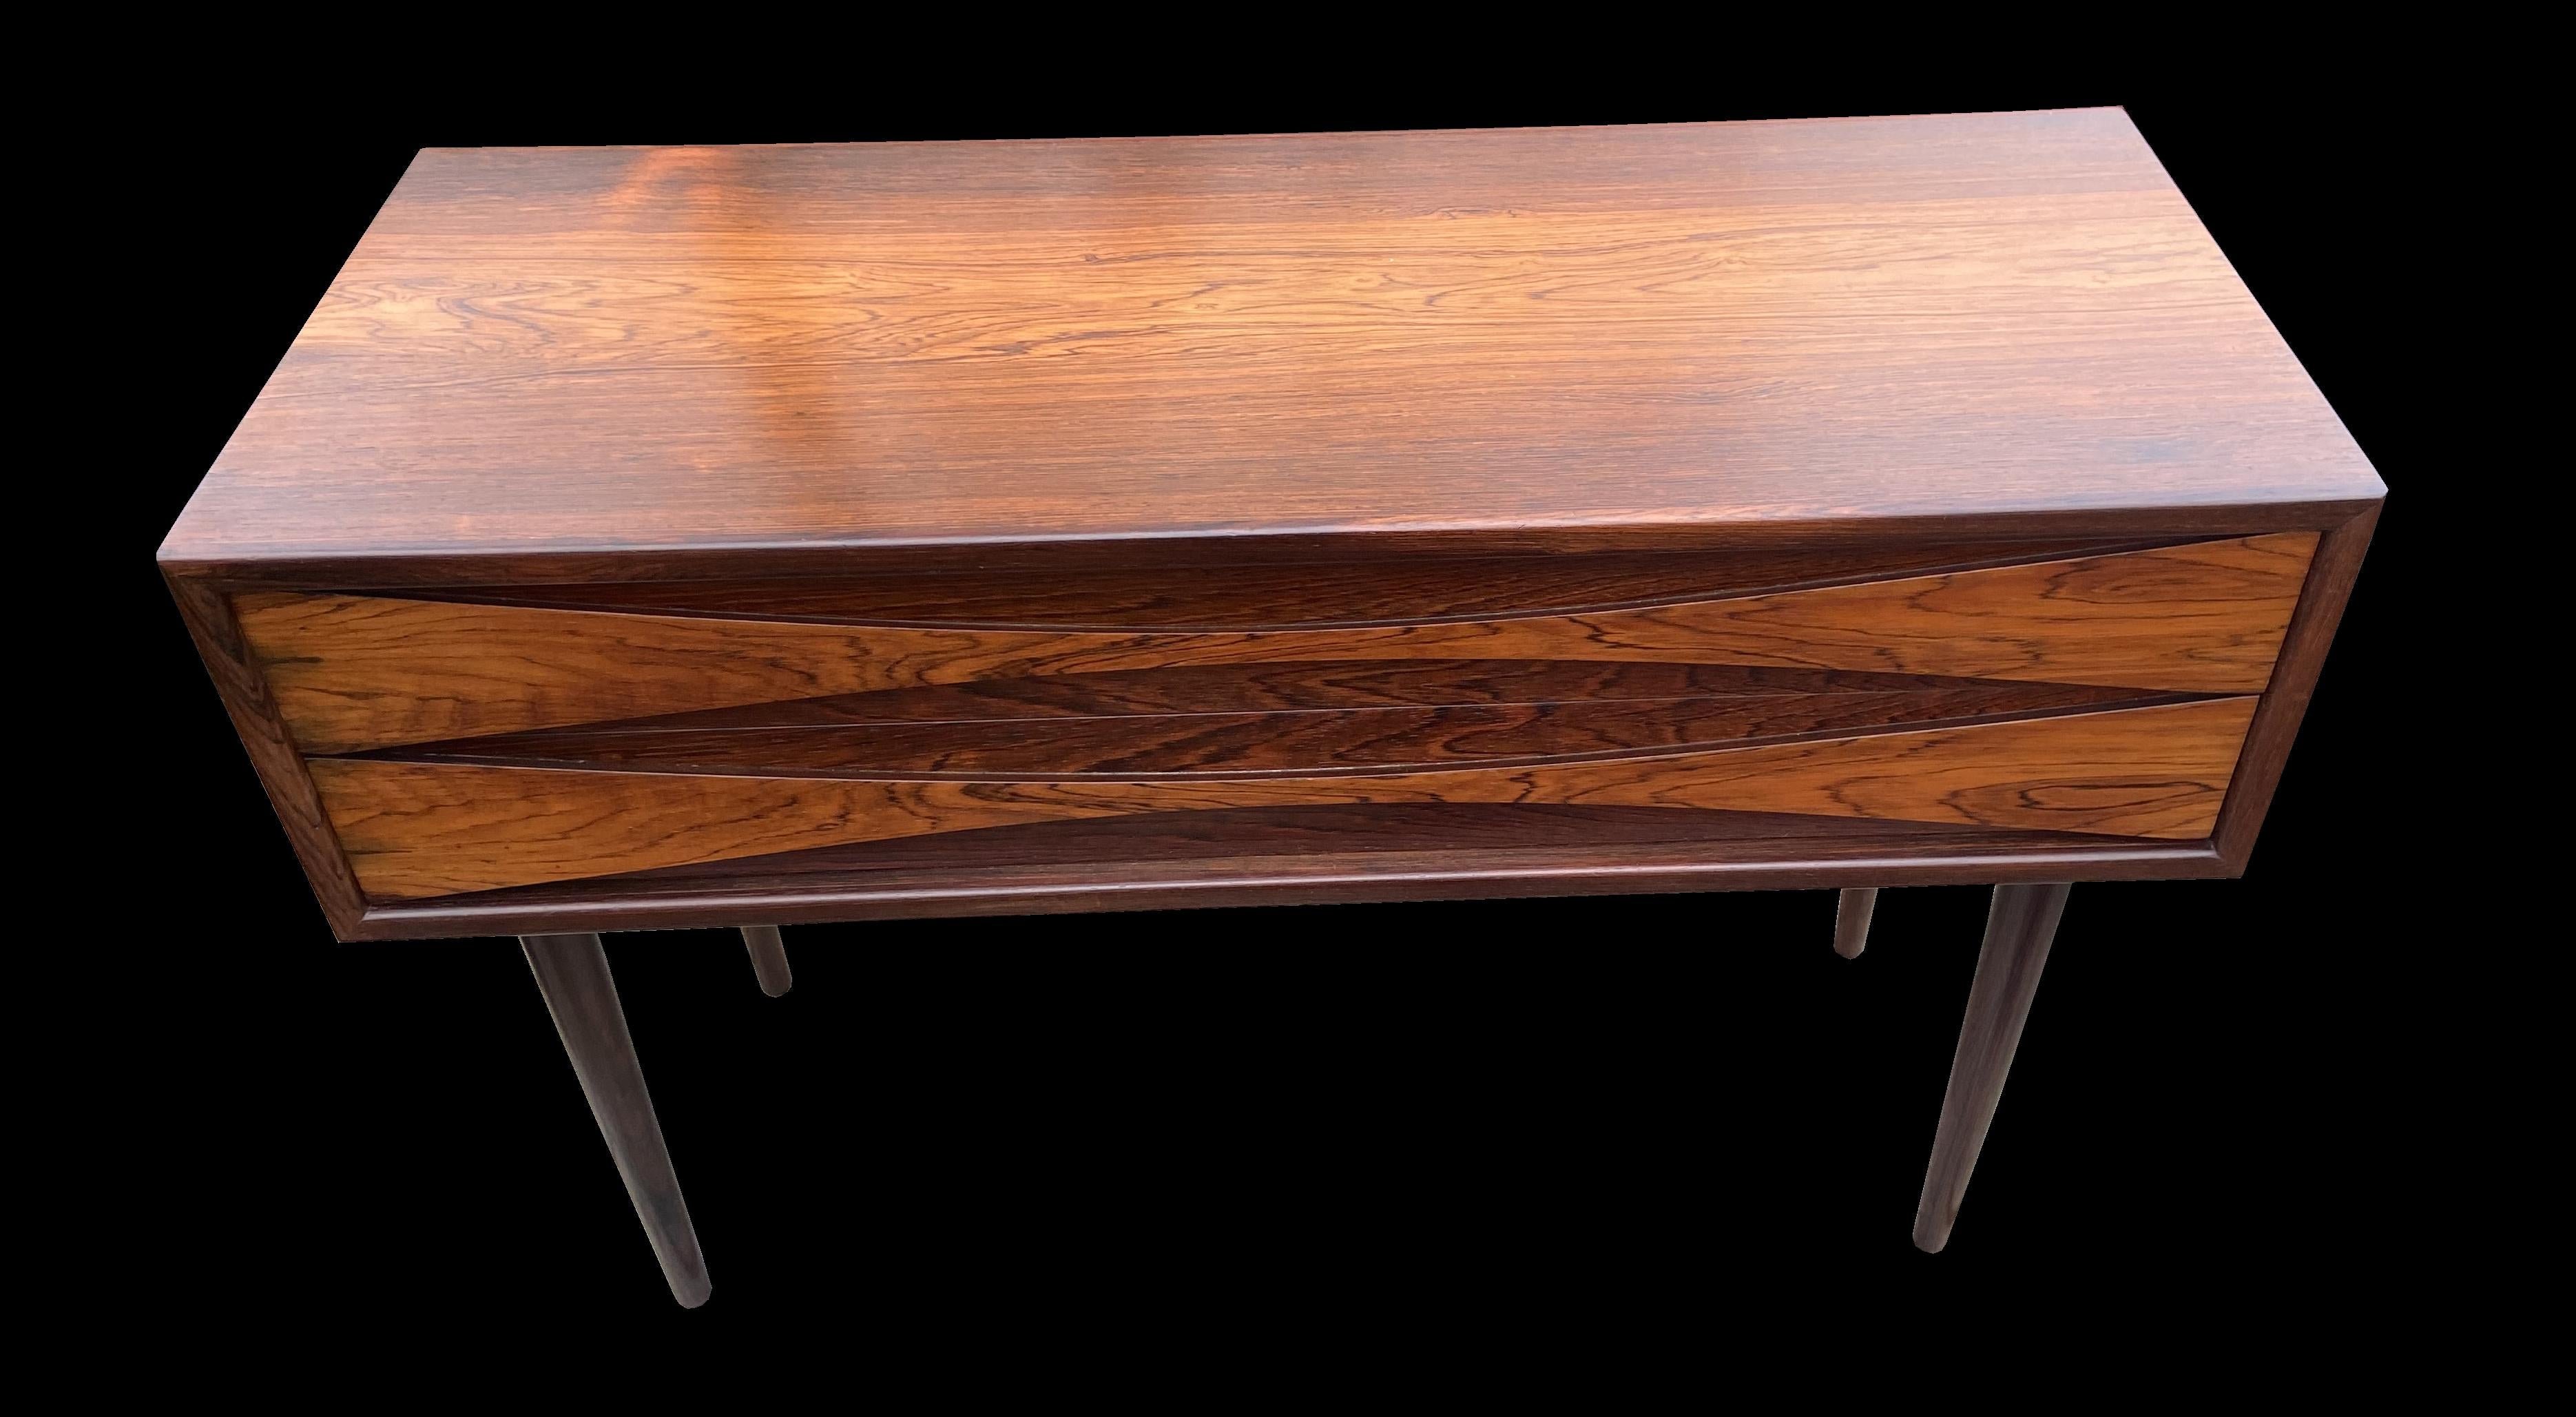 This example of the very sought after Clausen cabinet has particularly nicely marked grain and is in great condition.
The Rosewood used in this piece is Pau Ferro, A.K.A Santos Rosewood. Machaerium Scleroxylon, and is not subject to cites